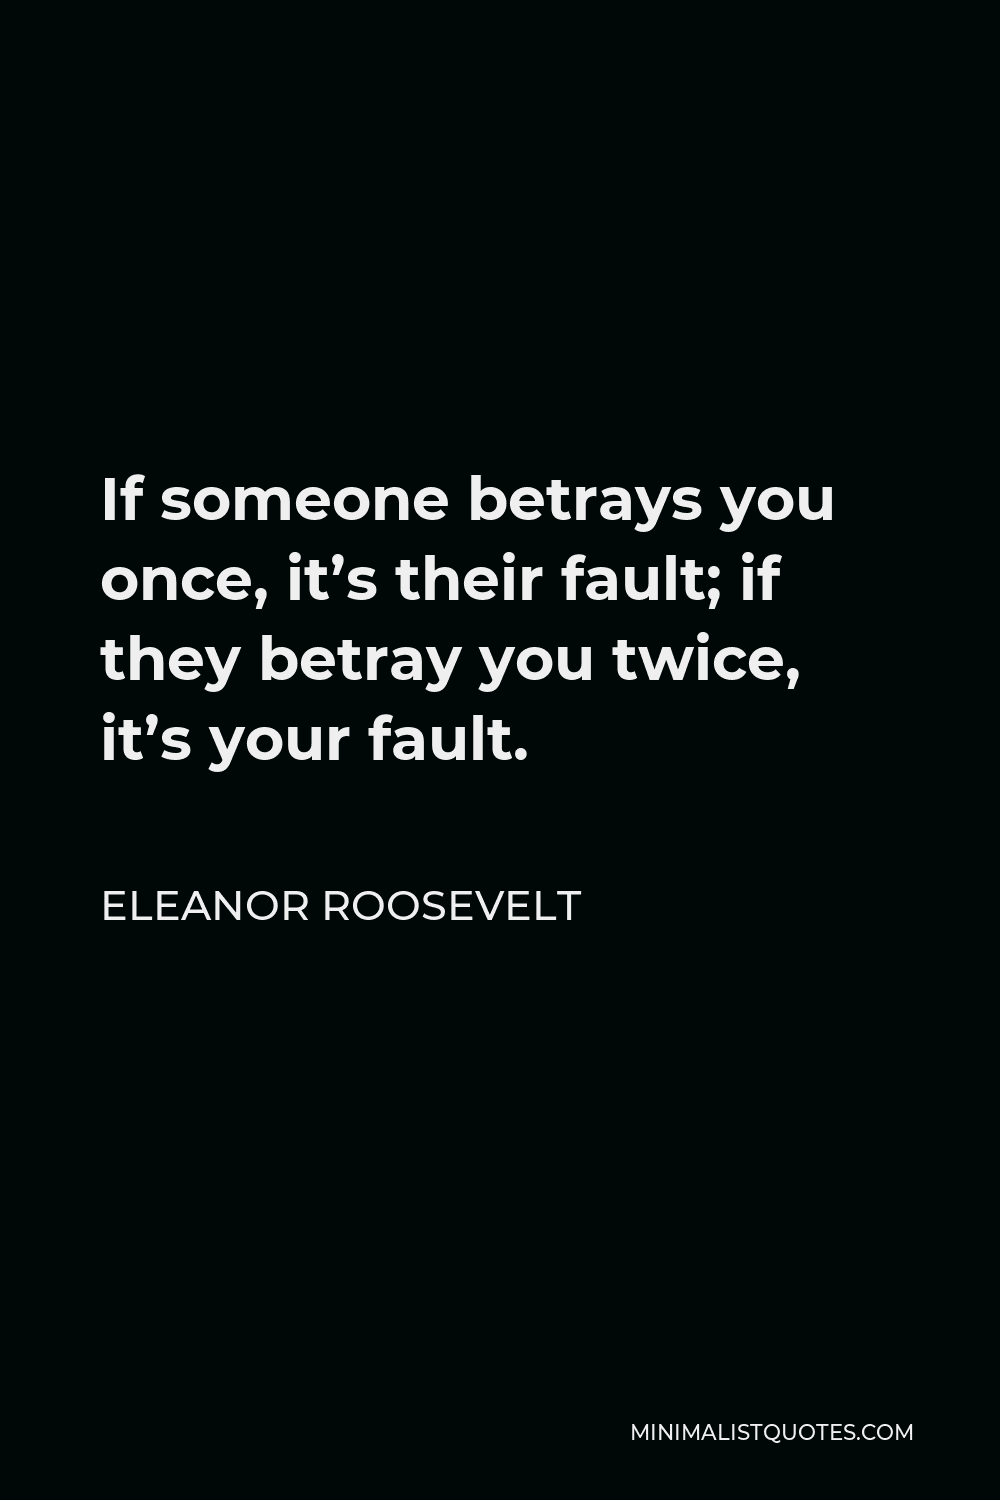 Eleanor Roosevelt Quote - If someone betrays you once, it’s their fault; if they betray you twice, it’s your fault.